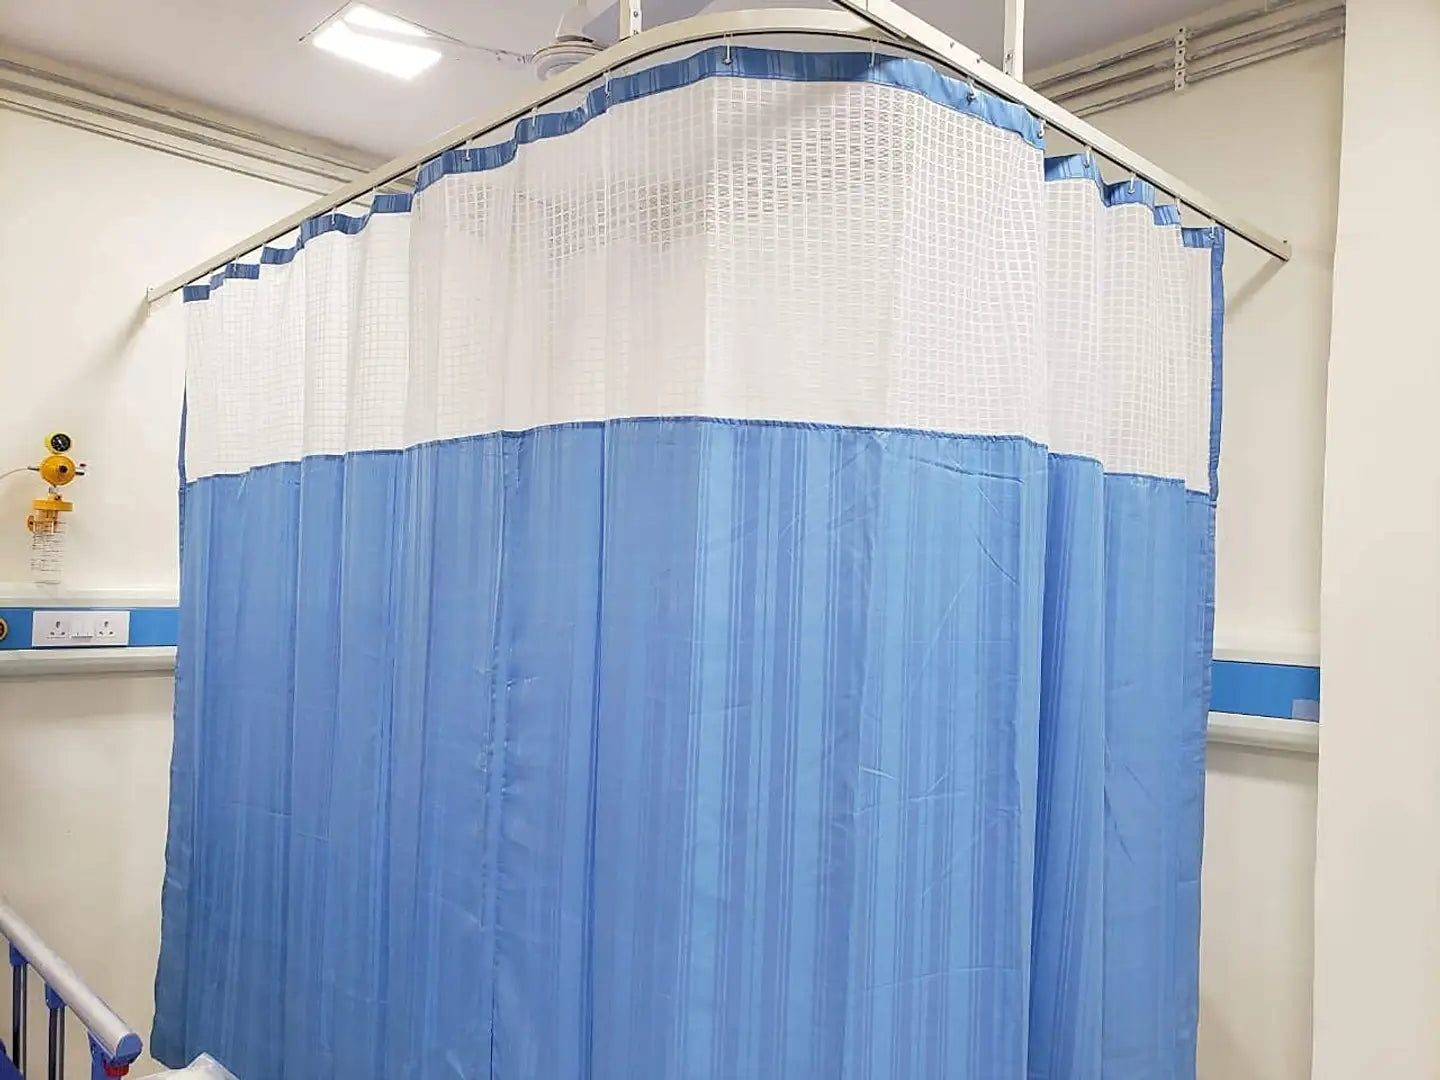 PVC Hospital Partition Curtain with Square net on top for ICU and Wards (7 FEET by 4.5 FEET, Blue)